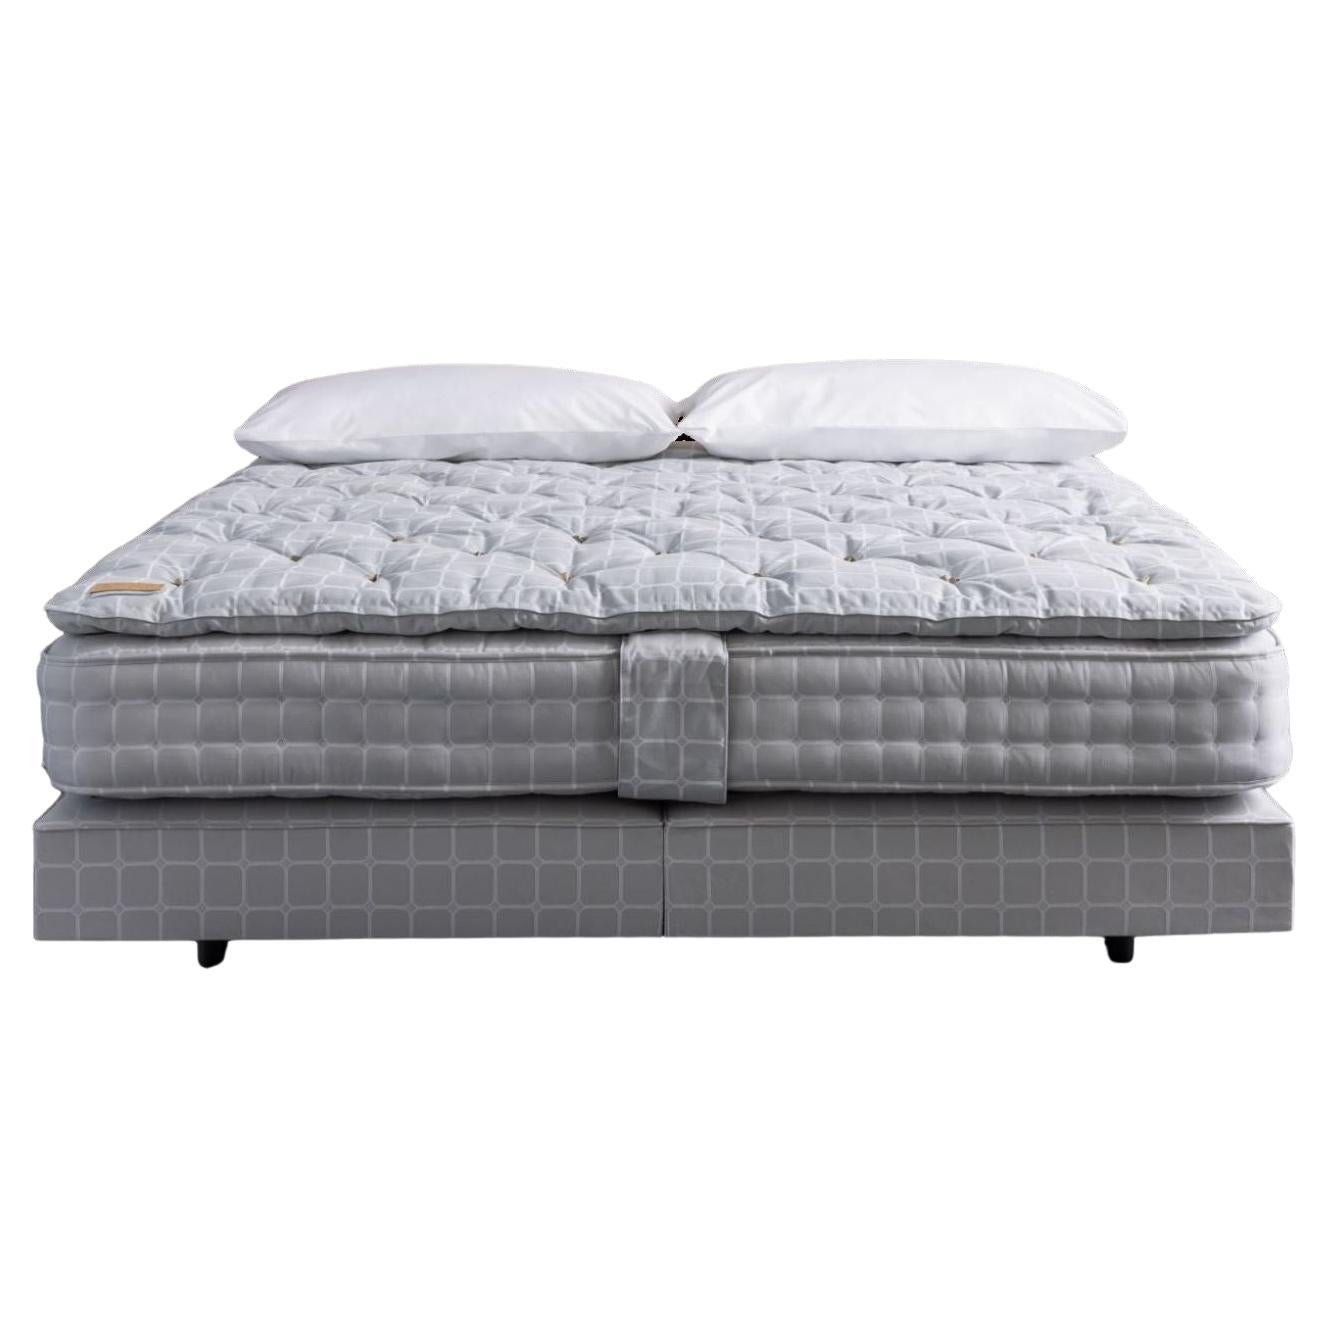 Savoir Nº5 Bed Set with Handcrafted Mattress, Box Spring & Topper US King Size For Sale